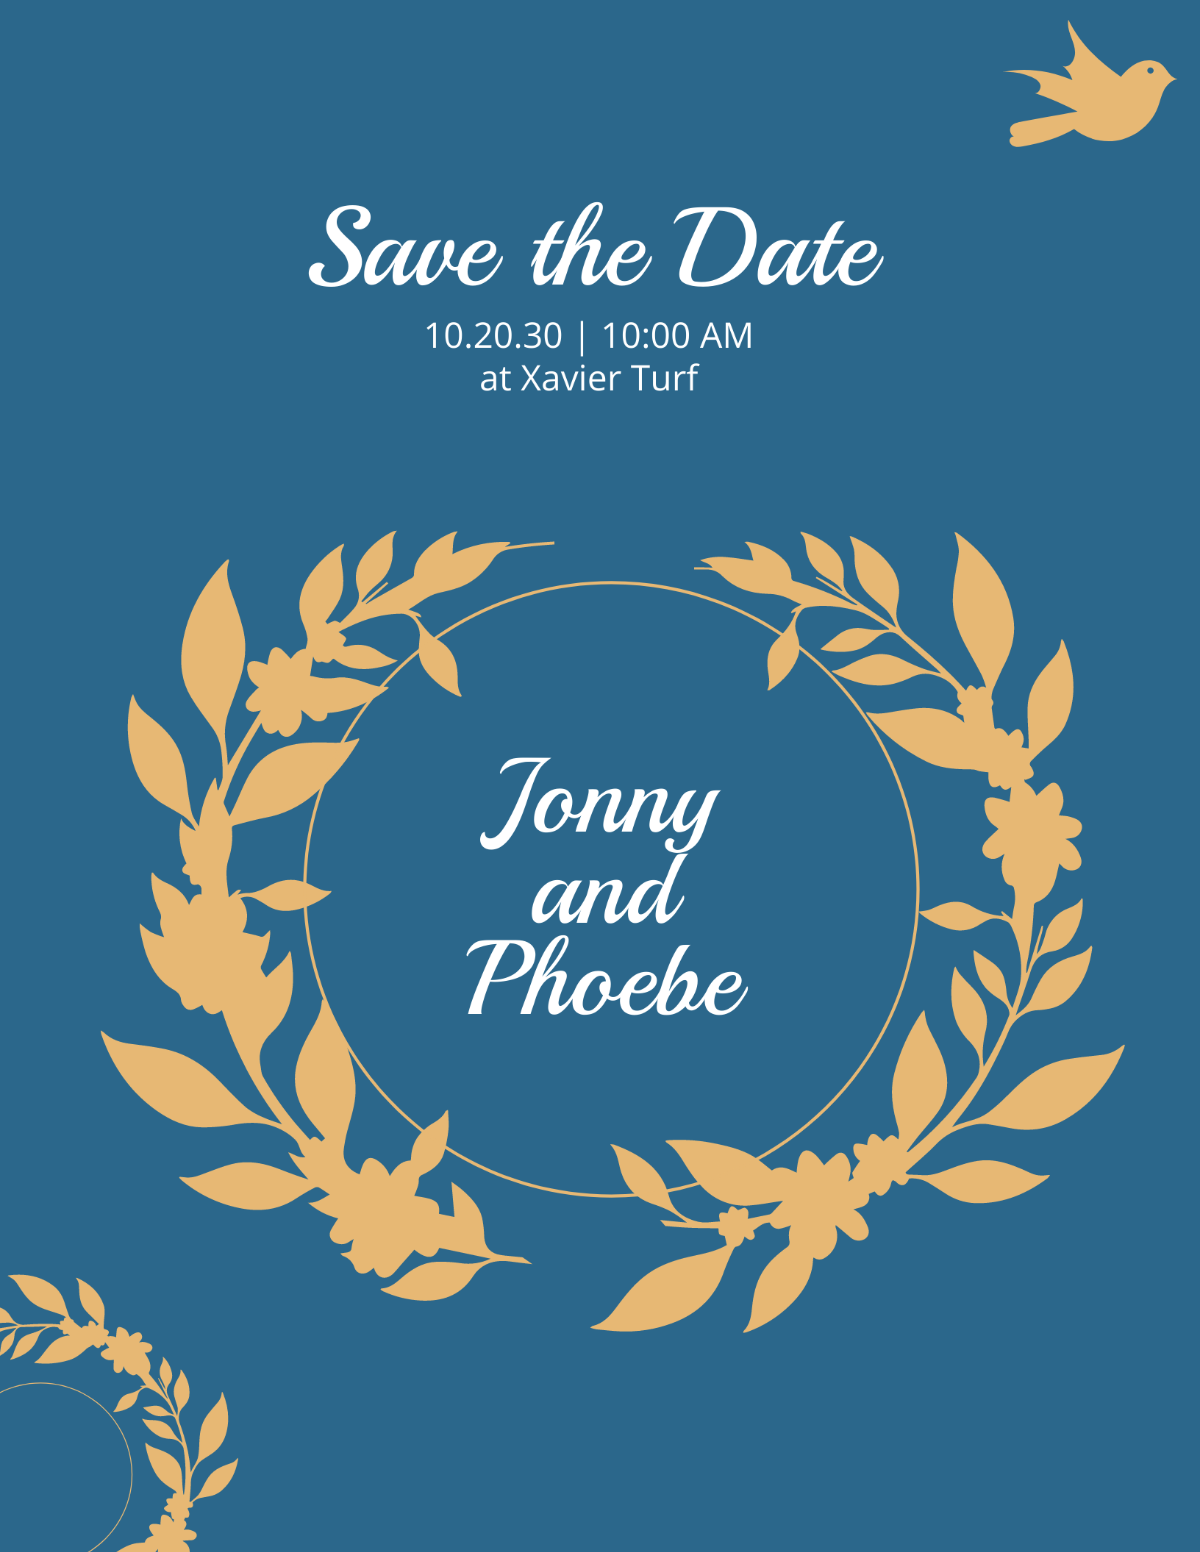 Save The Date Flyer Template